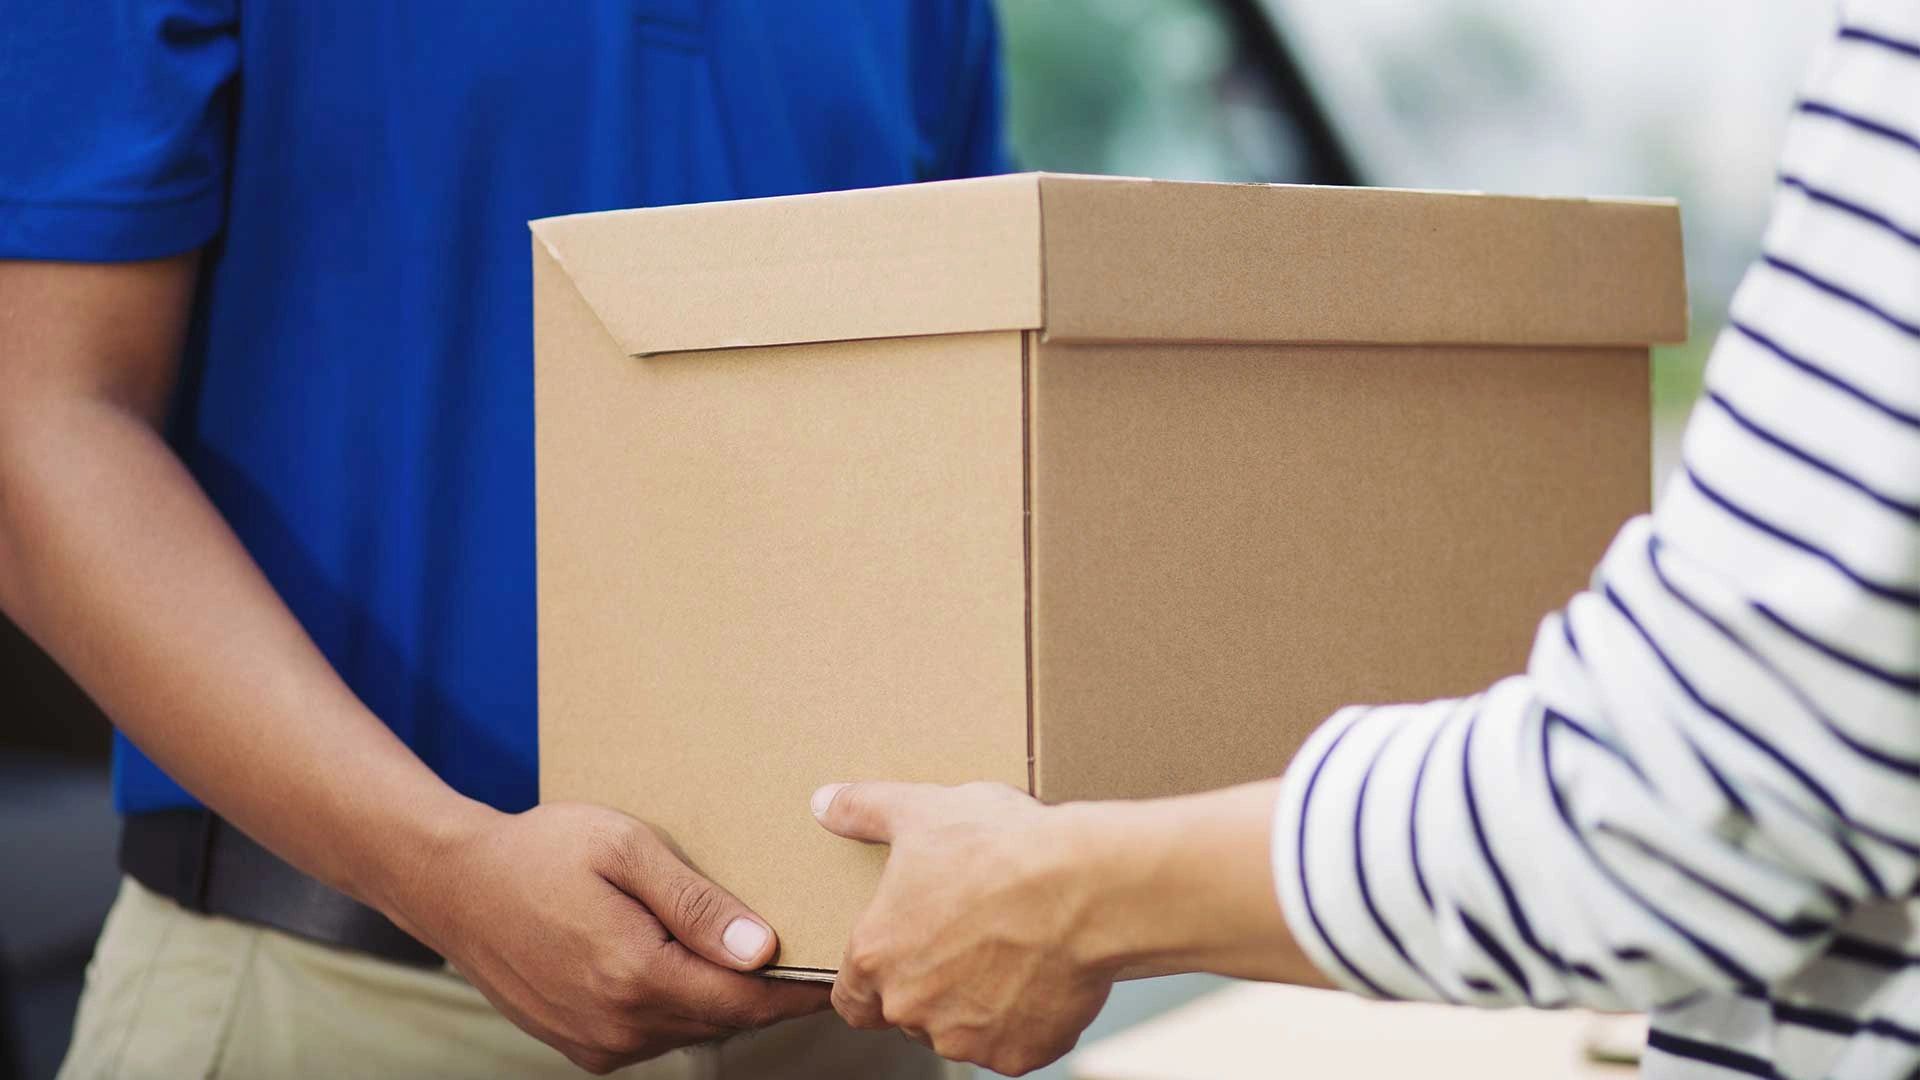 for your delivery needs, you can expect punctuality, professionalism, and dependability